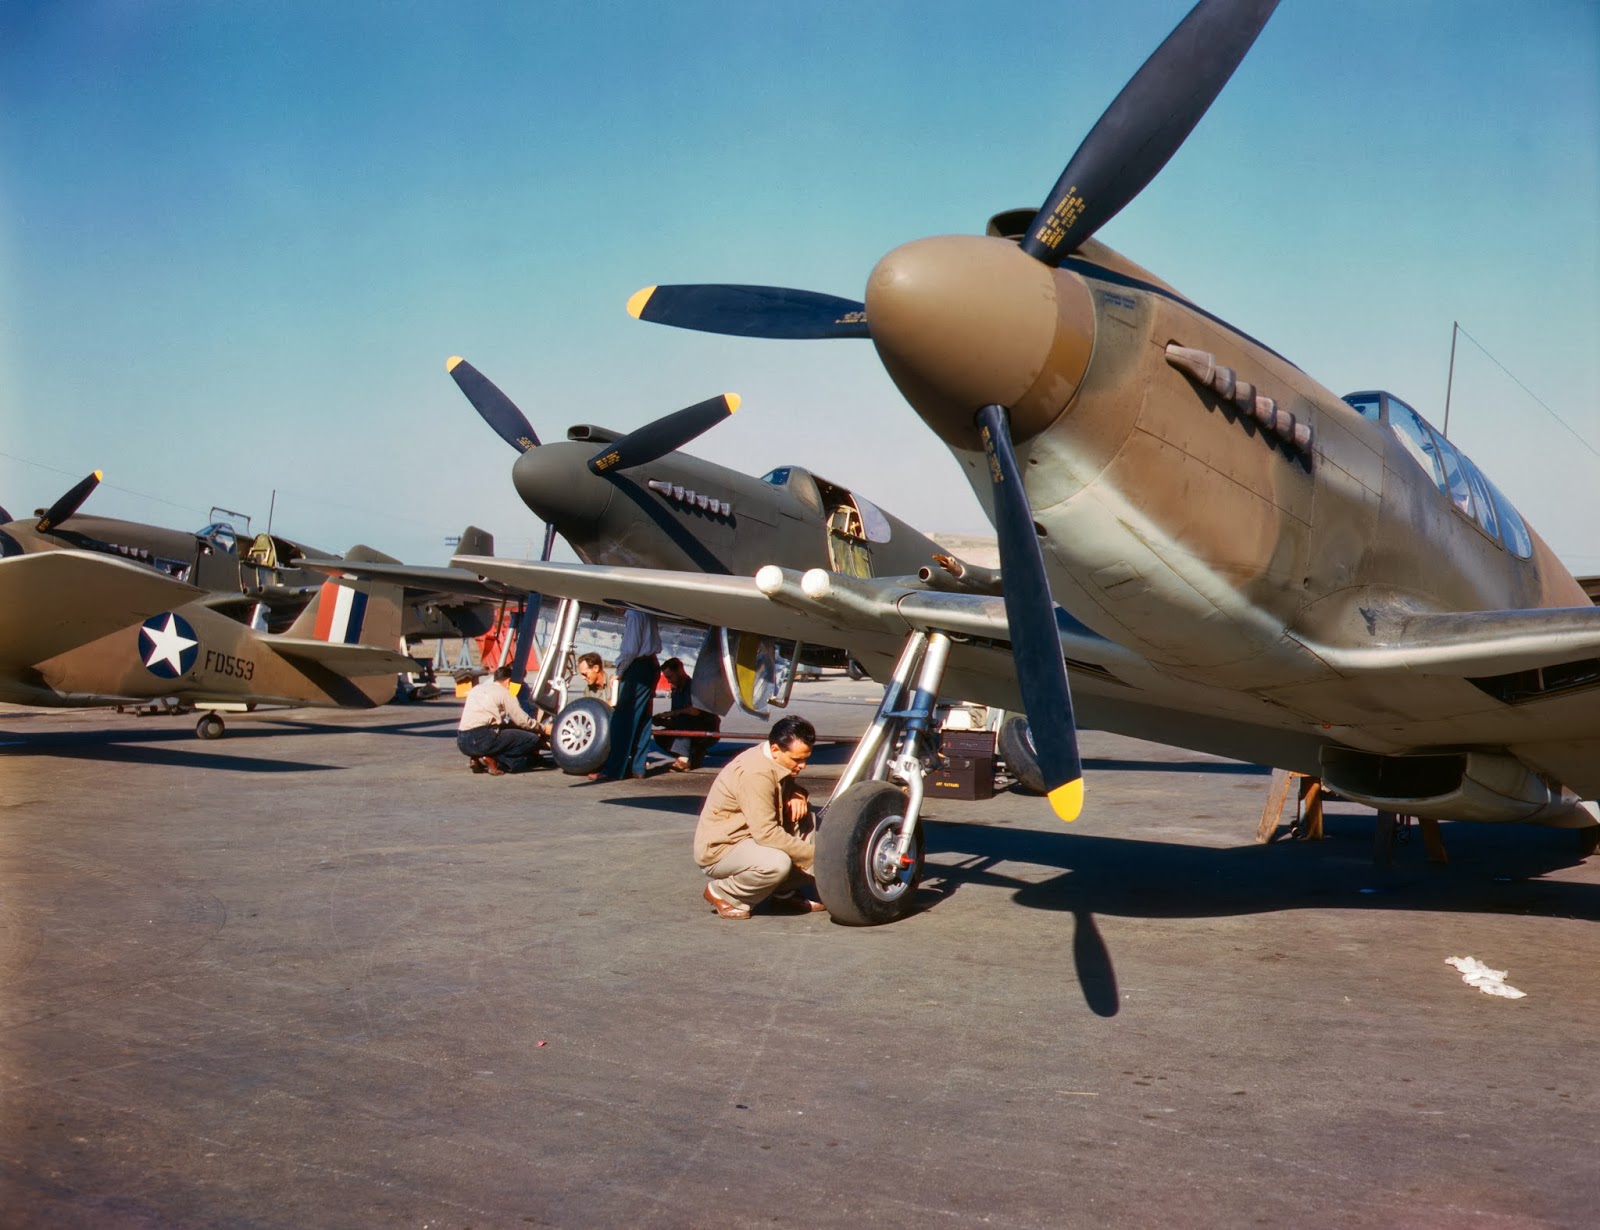 P-51+fighter+planes+being+prepared+for+test+flight+at+the+field+of+the+North+American+Aviation,+Inc.,+plant+in+Inglewood,+Calif.jpg